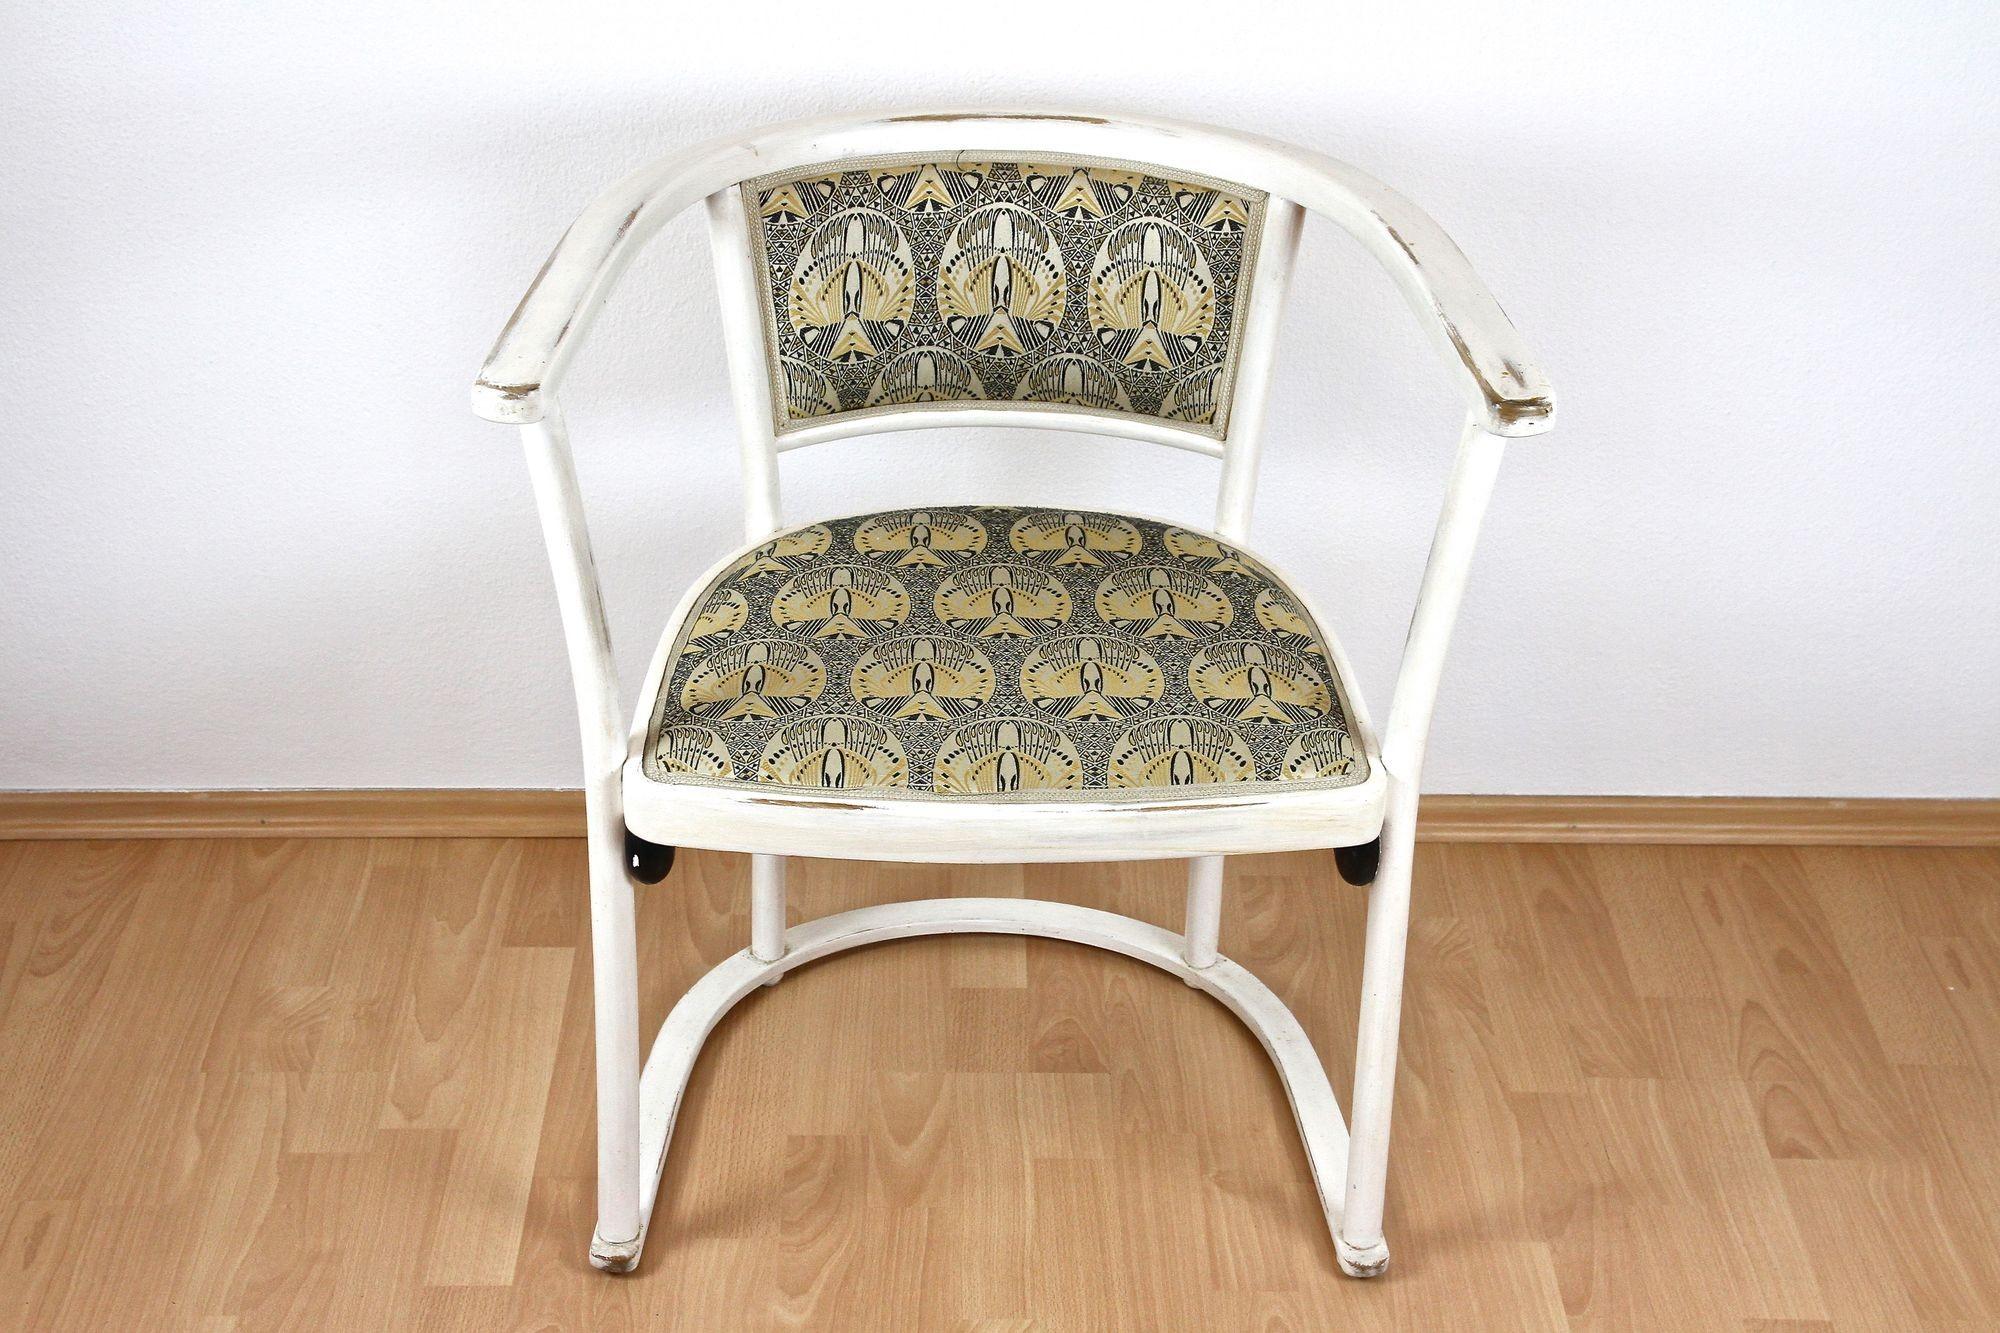 Rare, early 20th century armchair designed by the famous Austrian architect Marcel Kammerer (1878 -1959) around 1908 in Austria. The timeless design of this iconic Art Nouveau armchair was way ahead of its time. In this case we decided to just clean